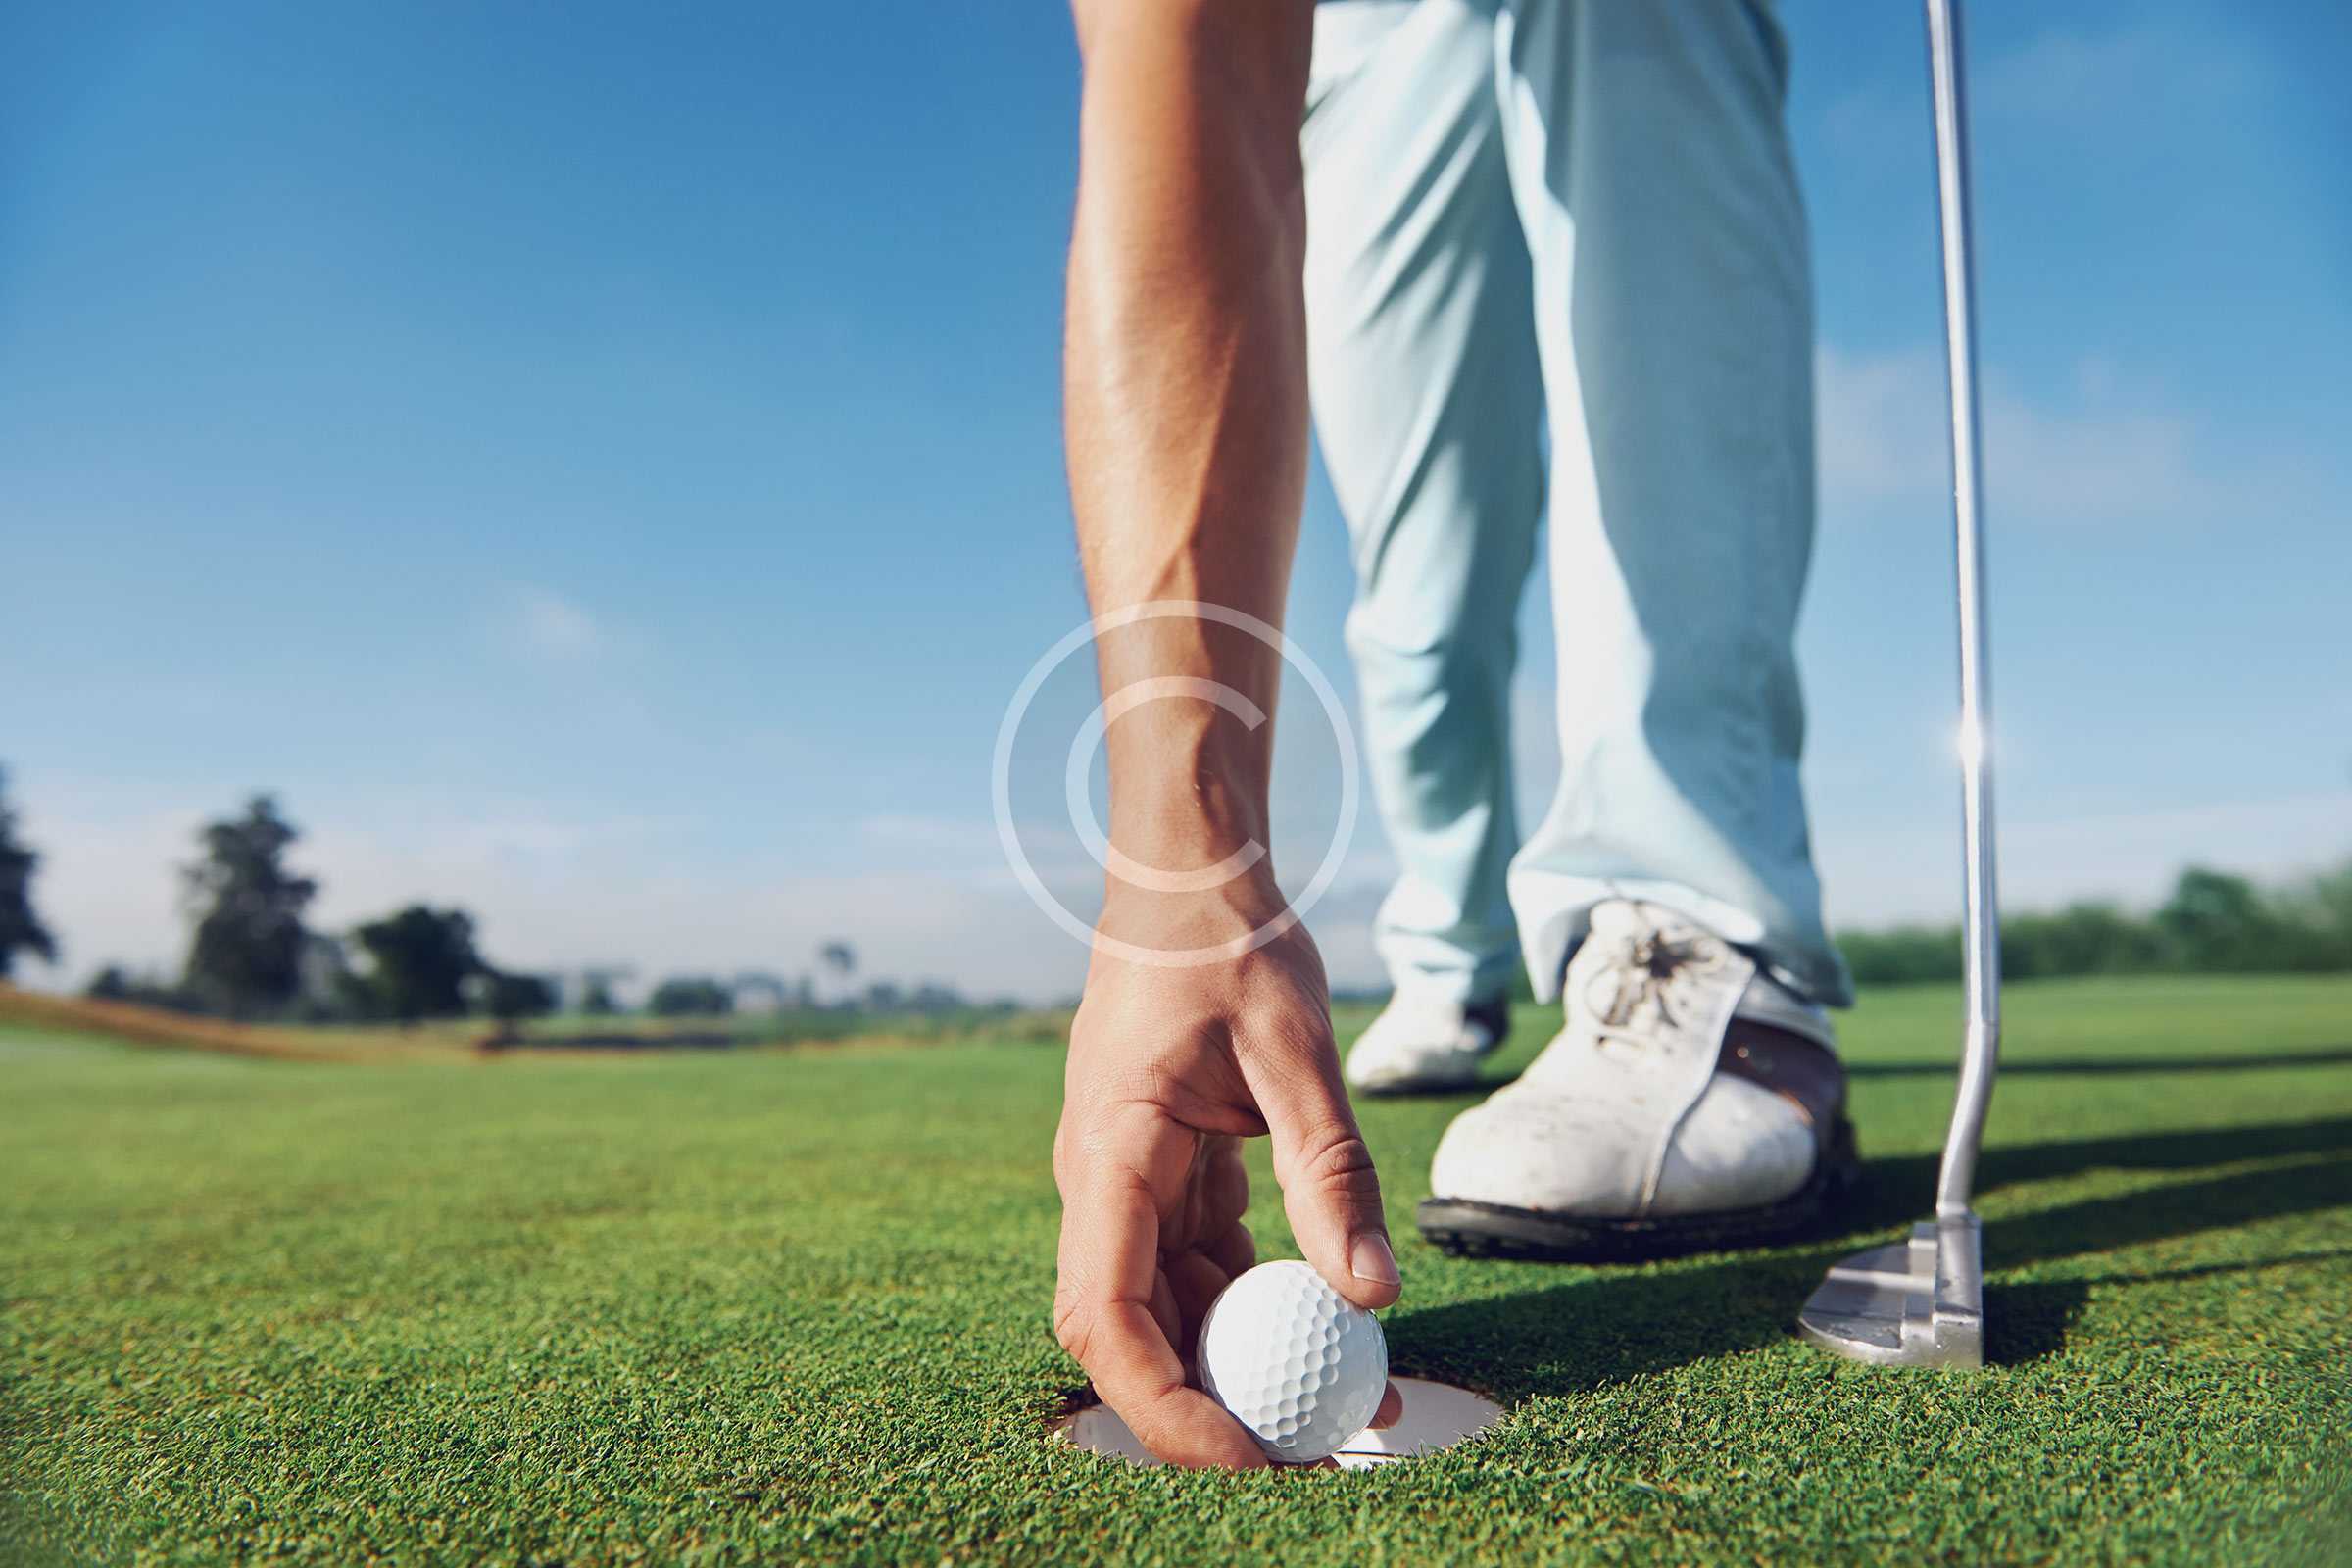 Golf in the Future: What Will It Be Like?